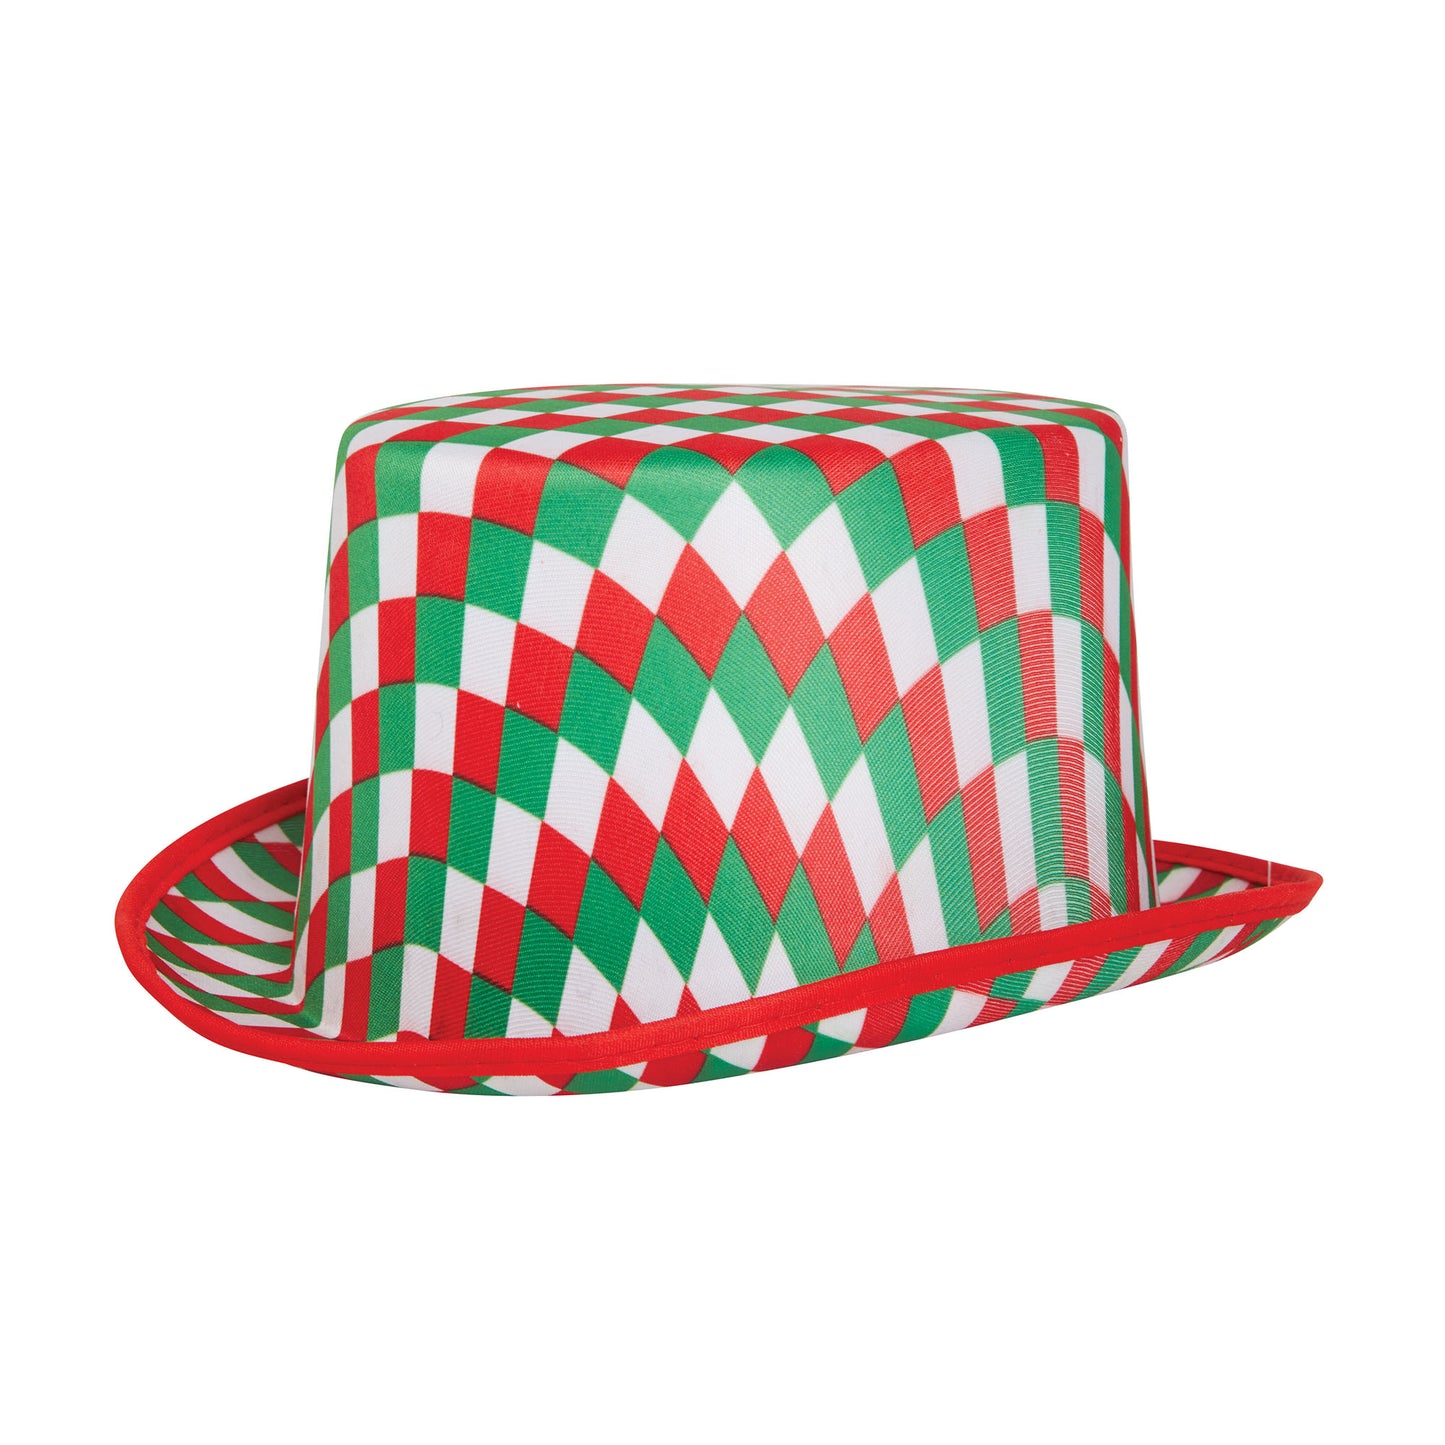 Top Hat Chequered (R/G/W)